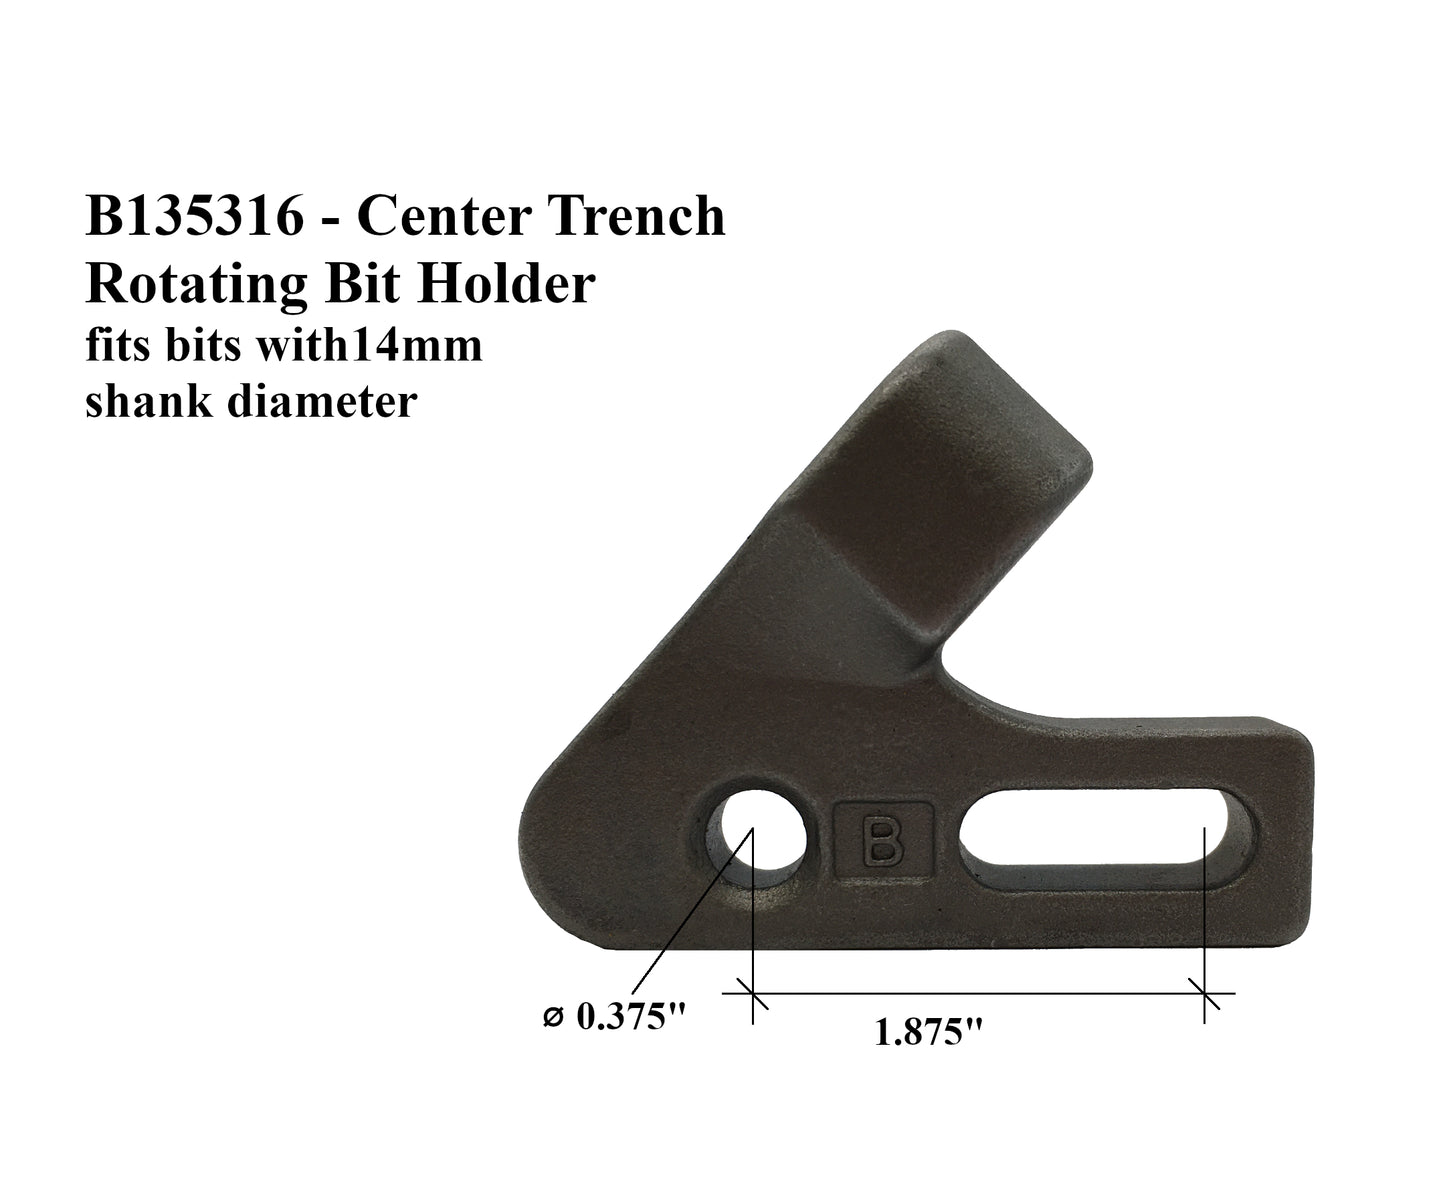 Center Cut, Rotating Bit Holder, 135316,for many small Chain Trenchers